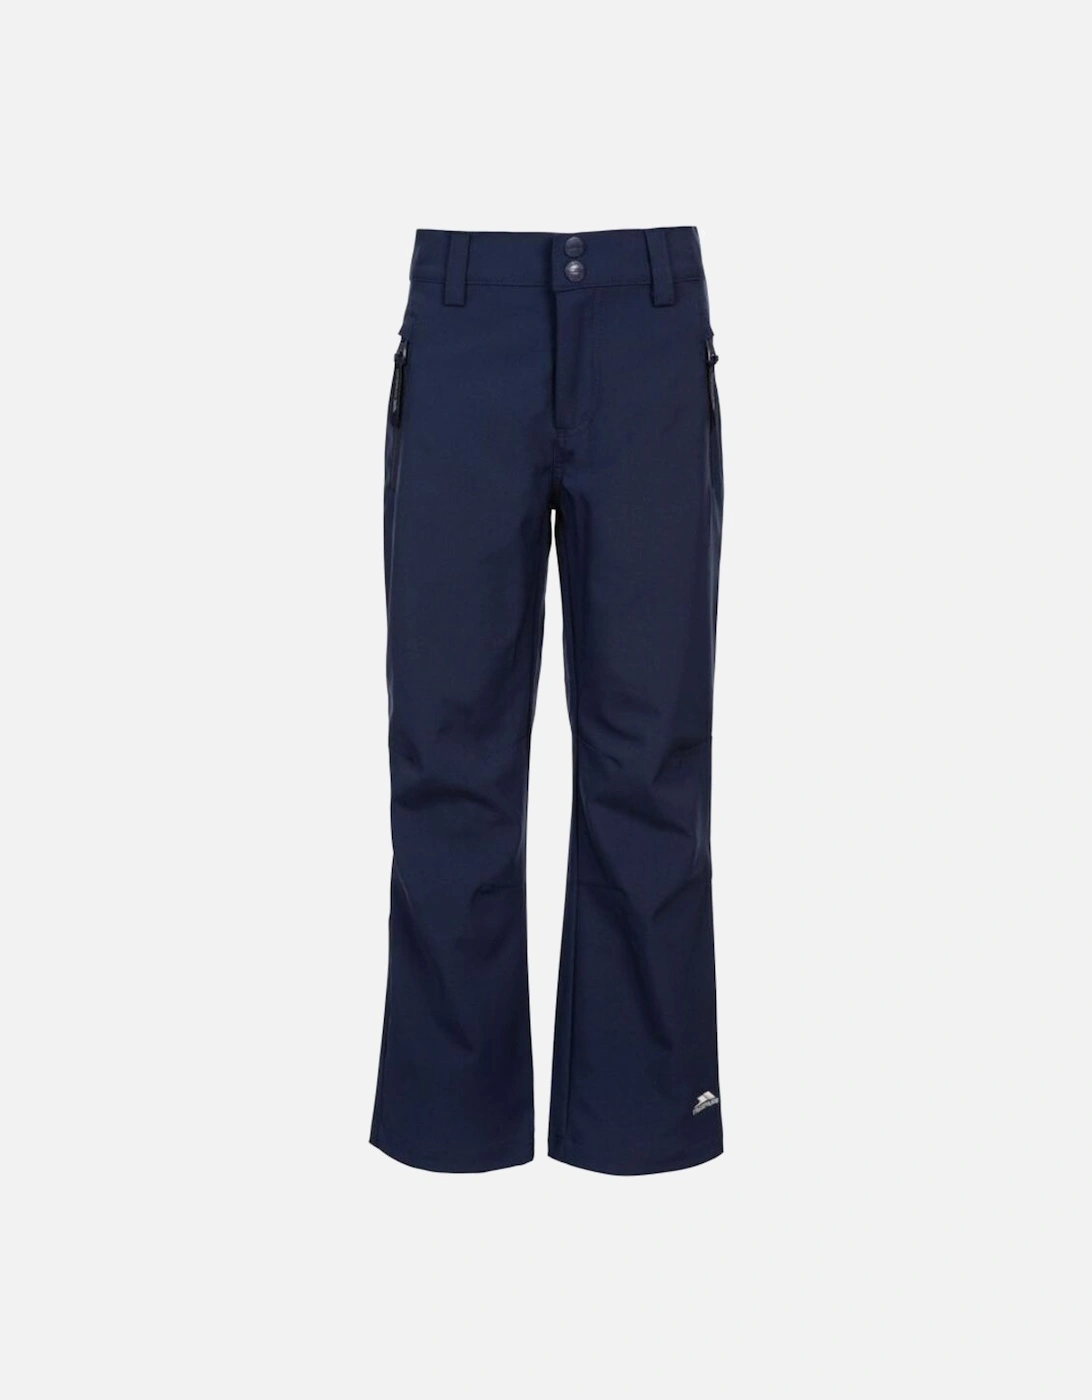 Childrens/Kids Aspiration Softshell Trousers, 4 of 3